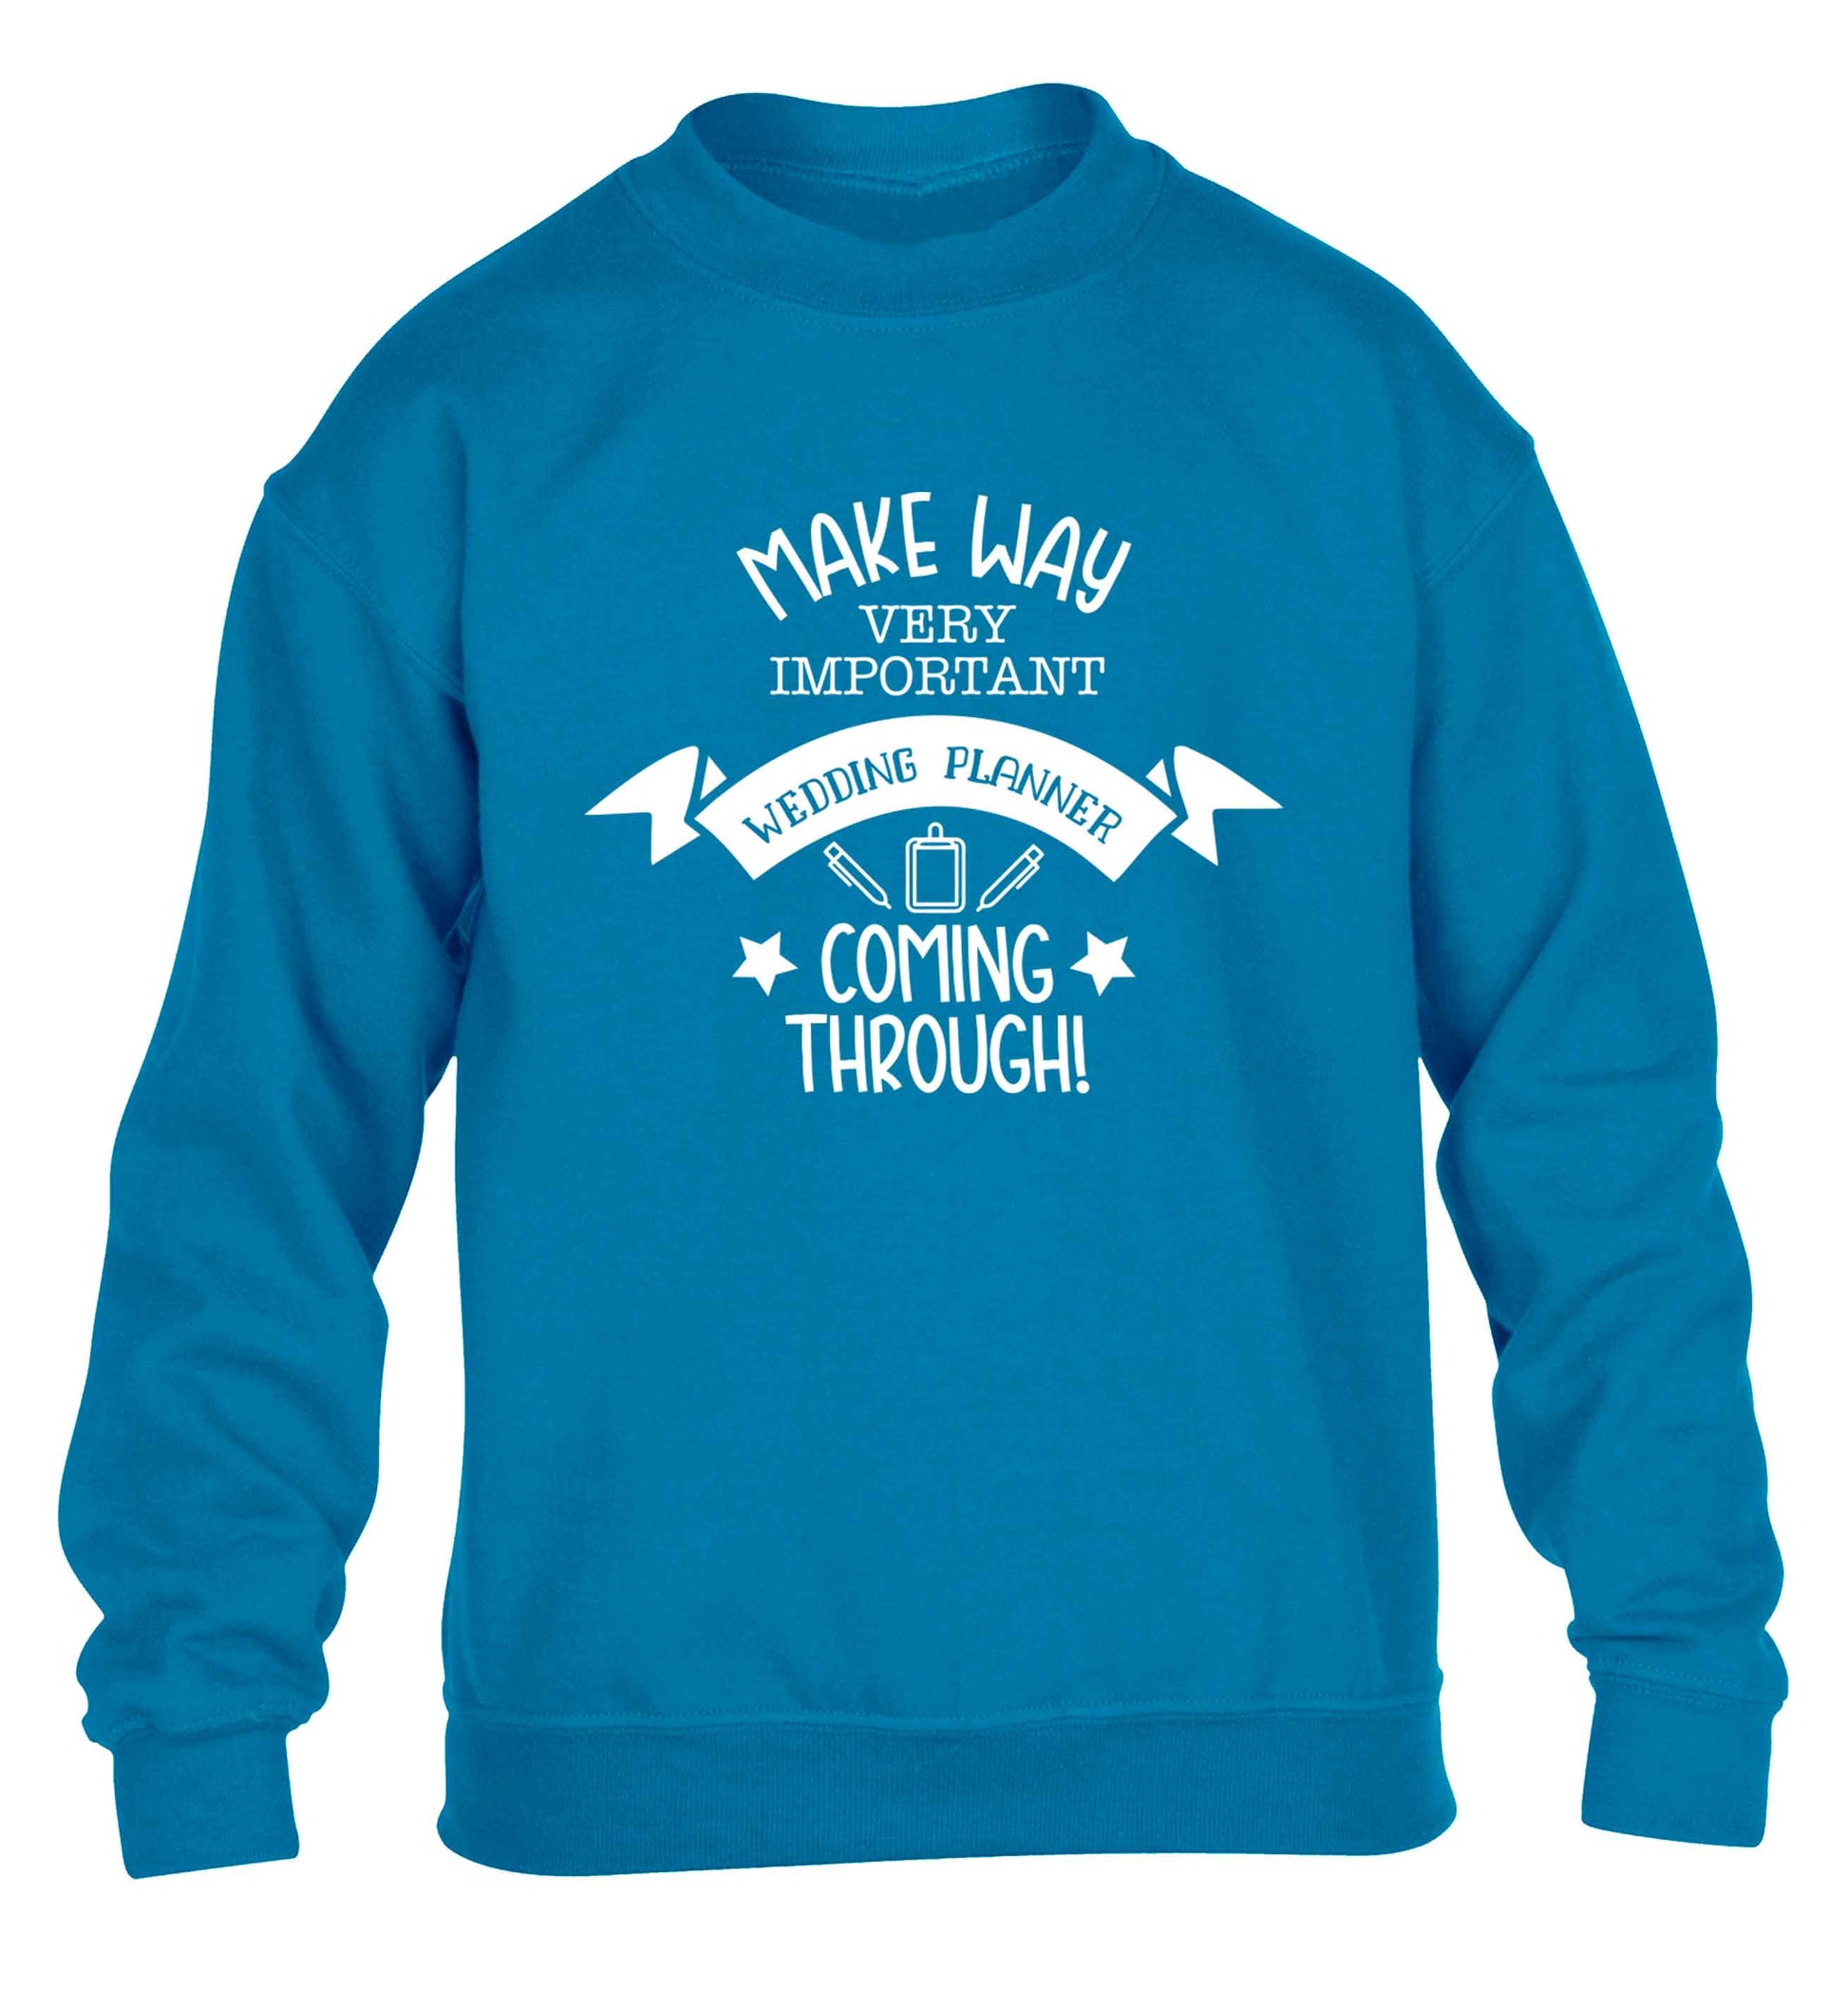 Make way very important wedding planner coming through children's blue sweater 12-13 Years